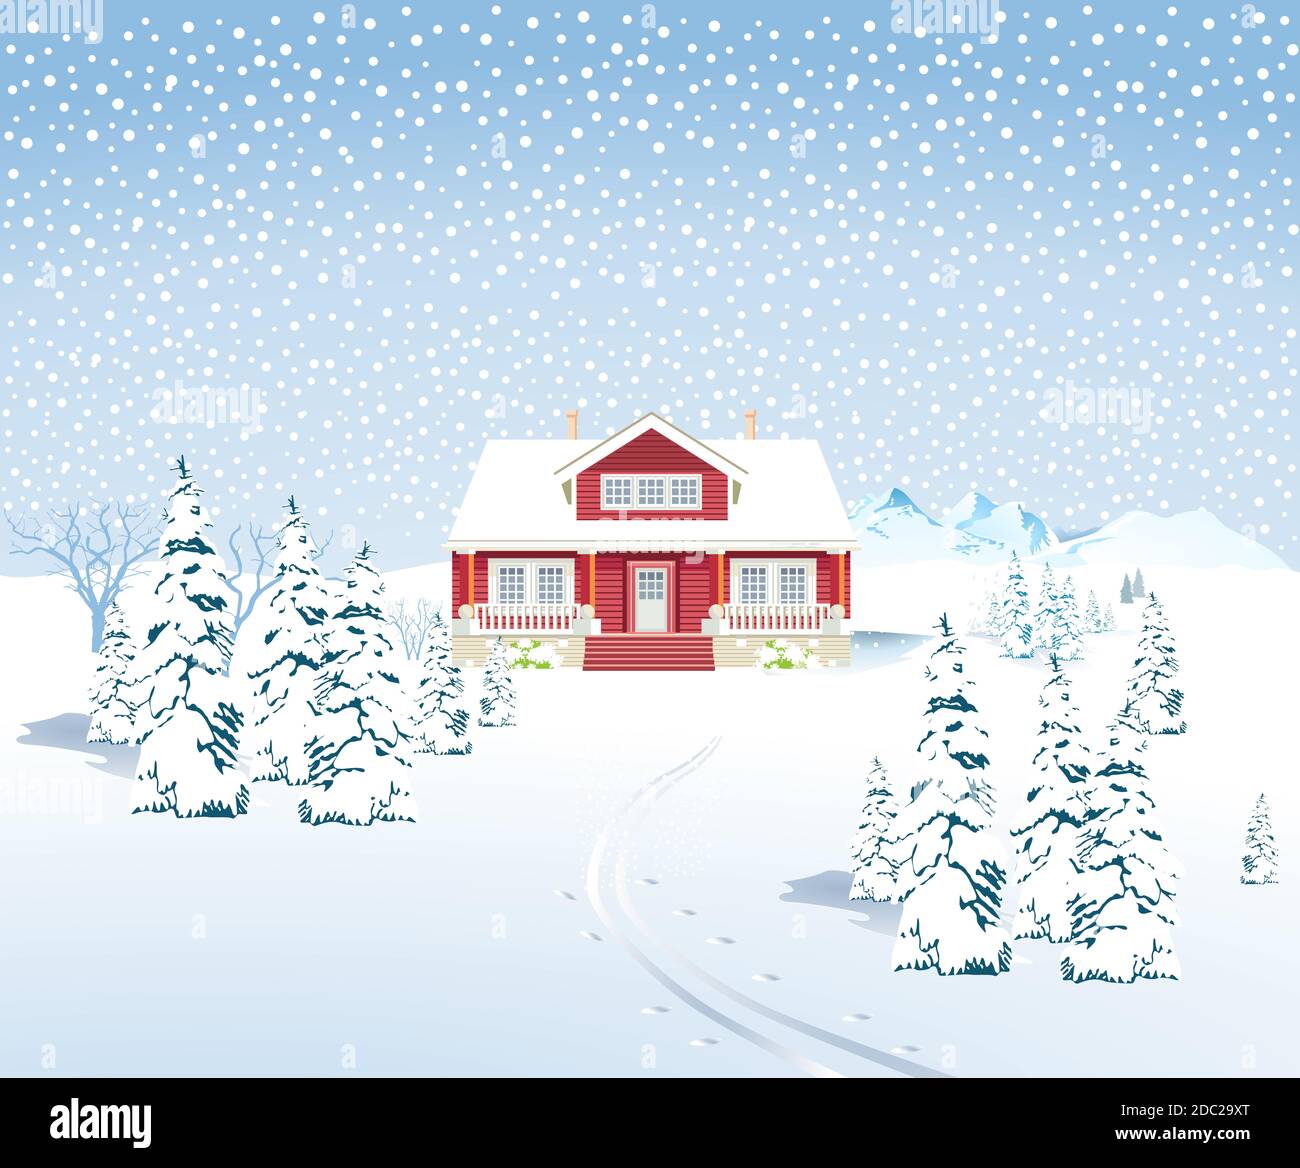 Winter landscape with country house, -  illustration Stock Photo